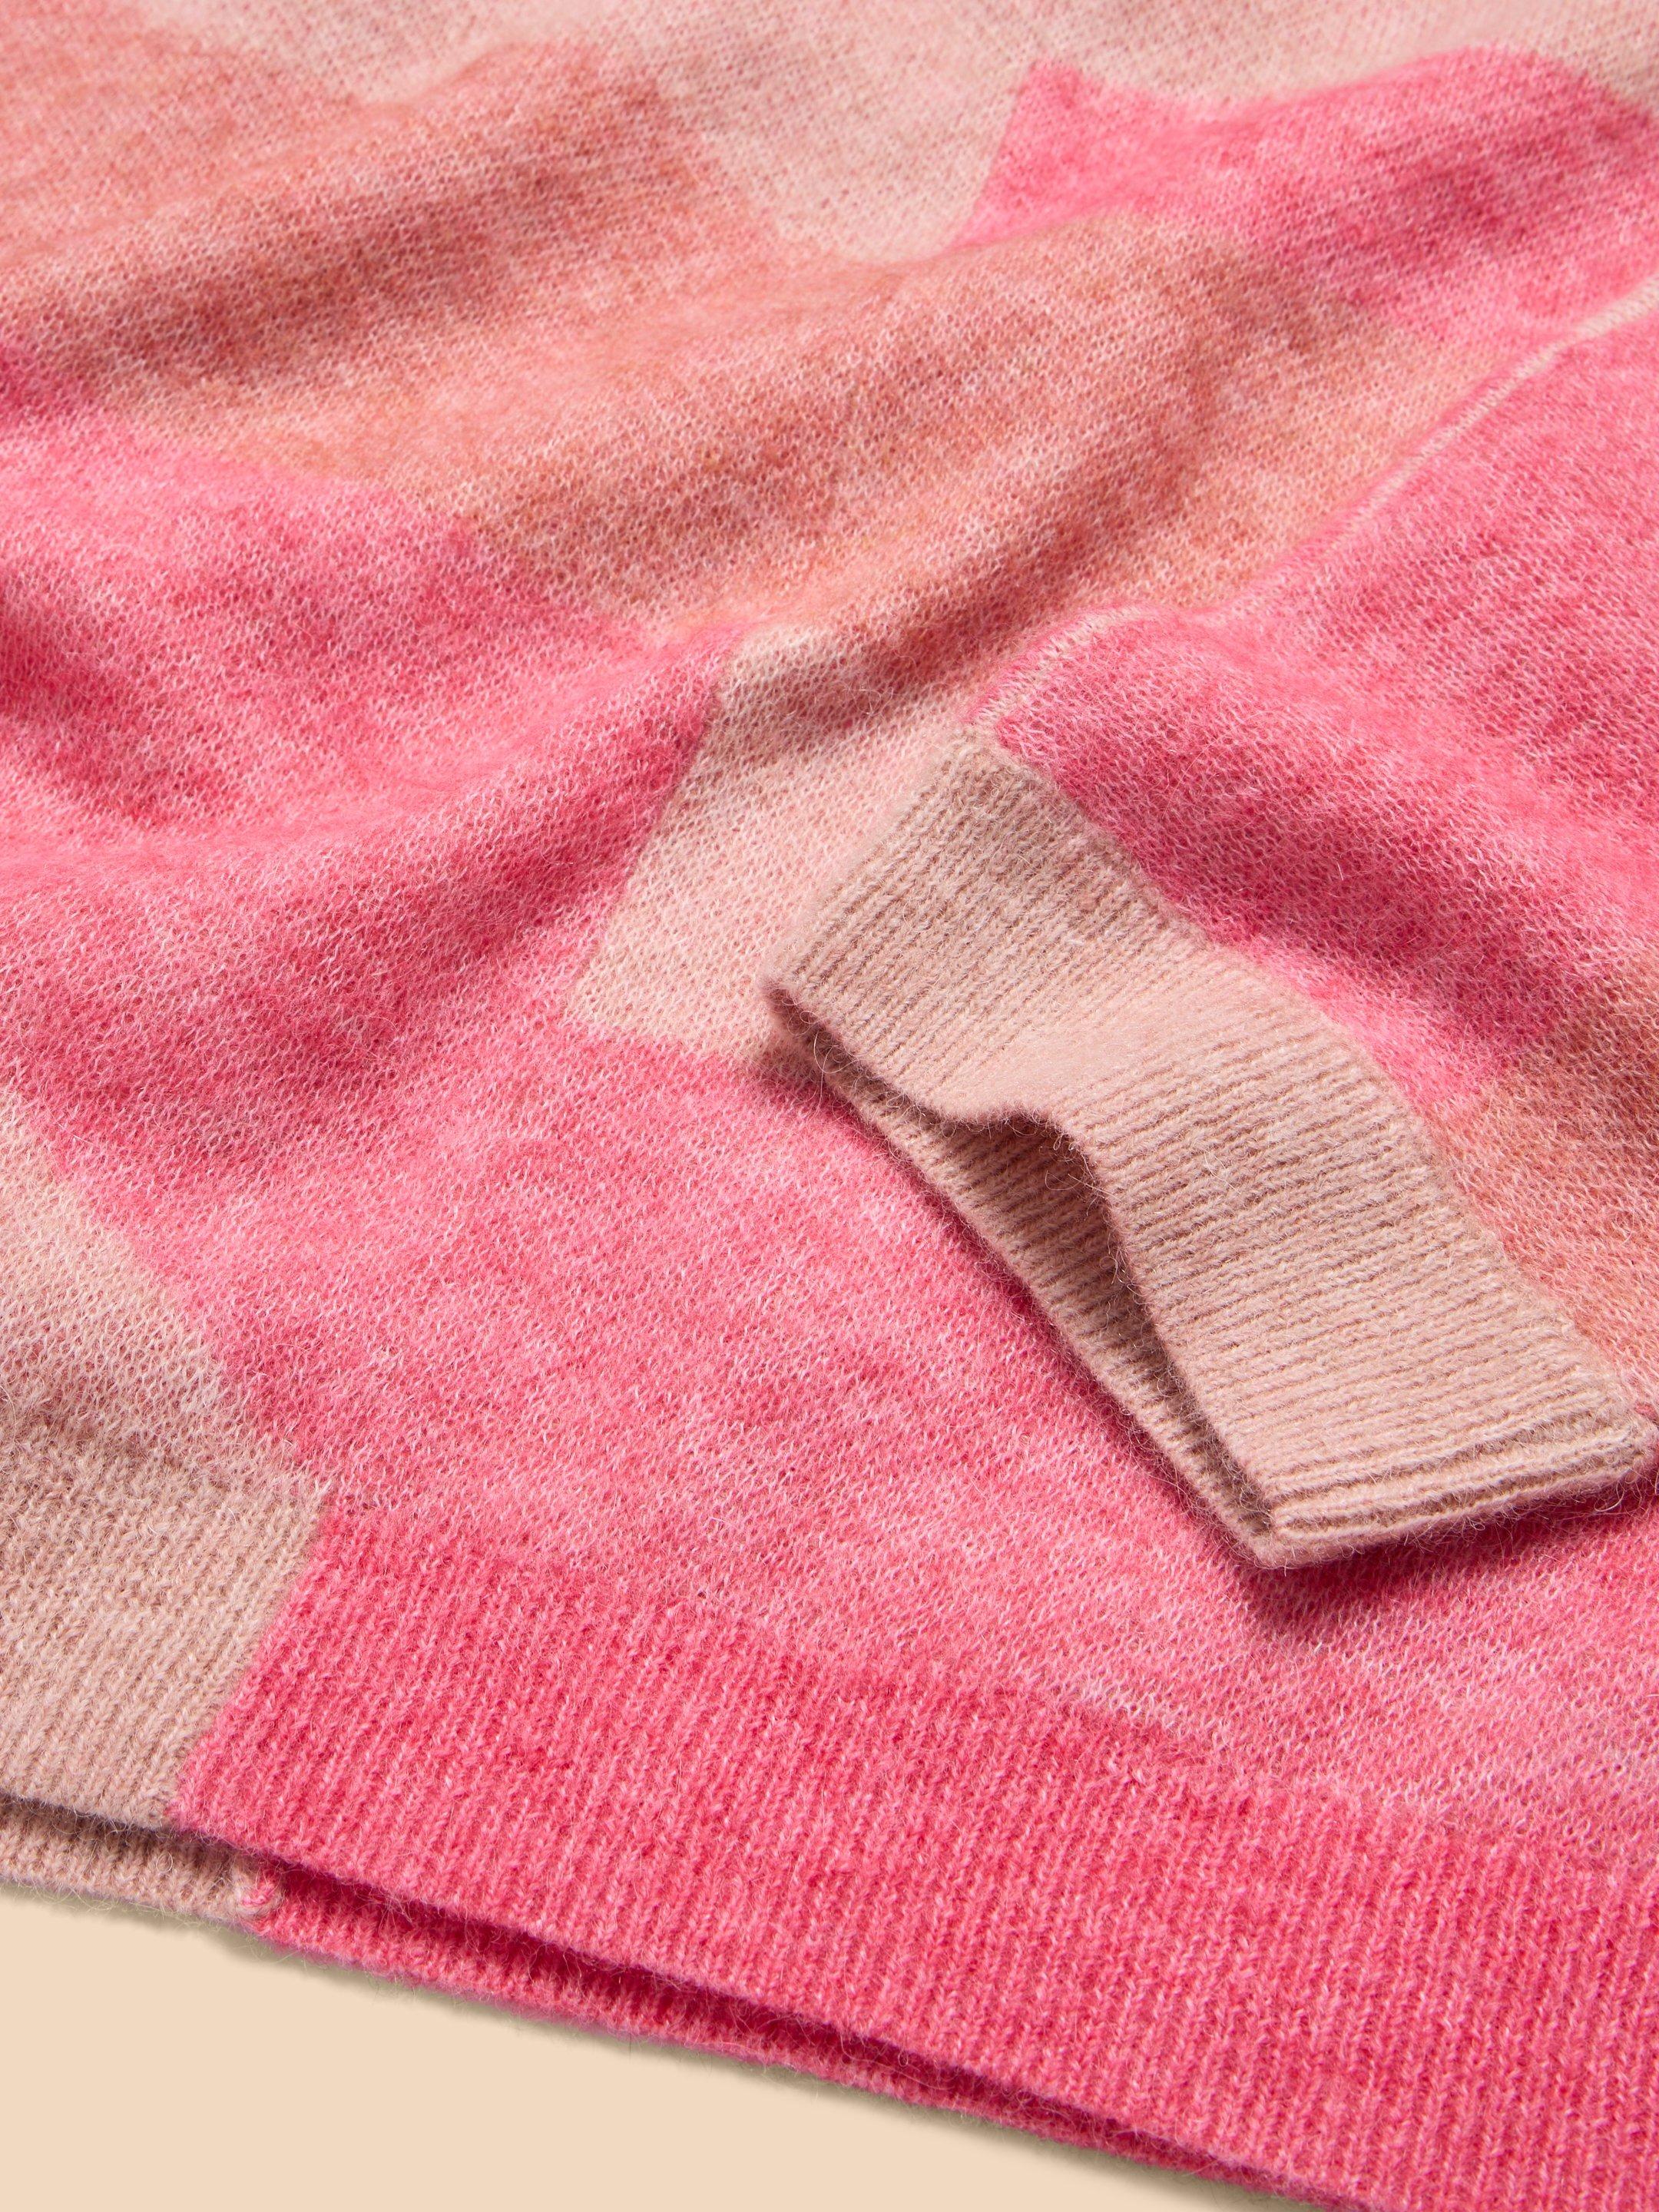 COLOURBLOCK DOLLY JUMPER in PINK MLT - FLAT DETAIL